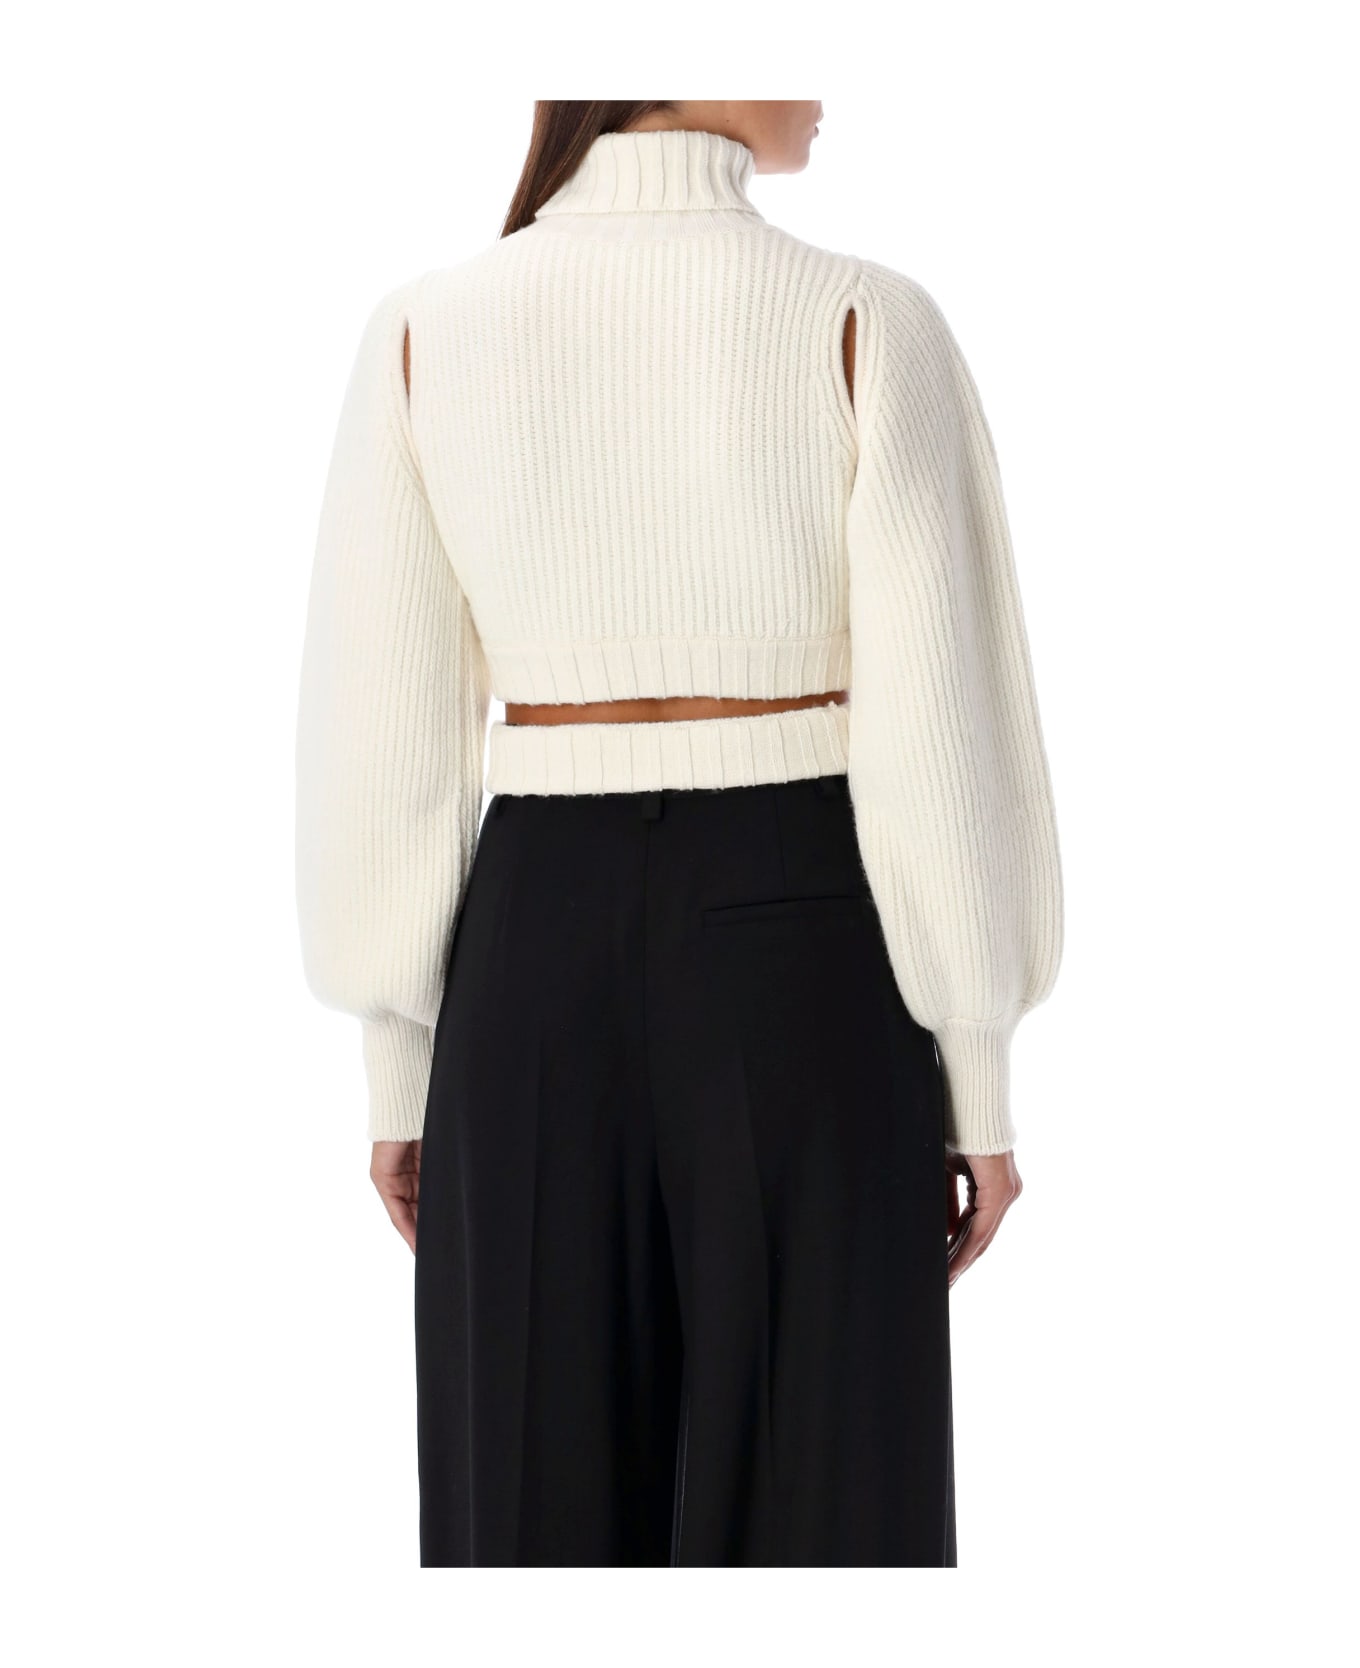 ANDREĀDAMO Cropped Knit Sweater - IVORY